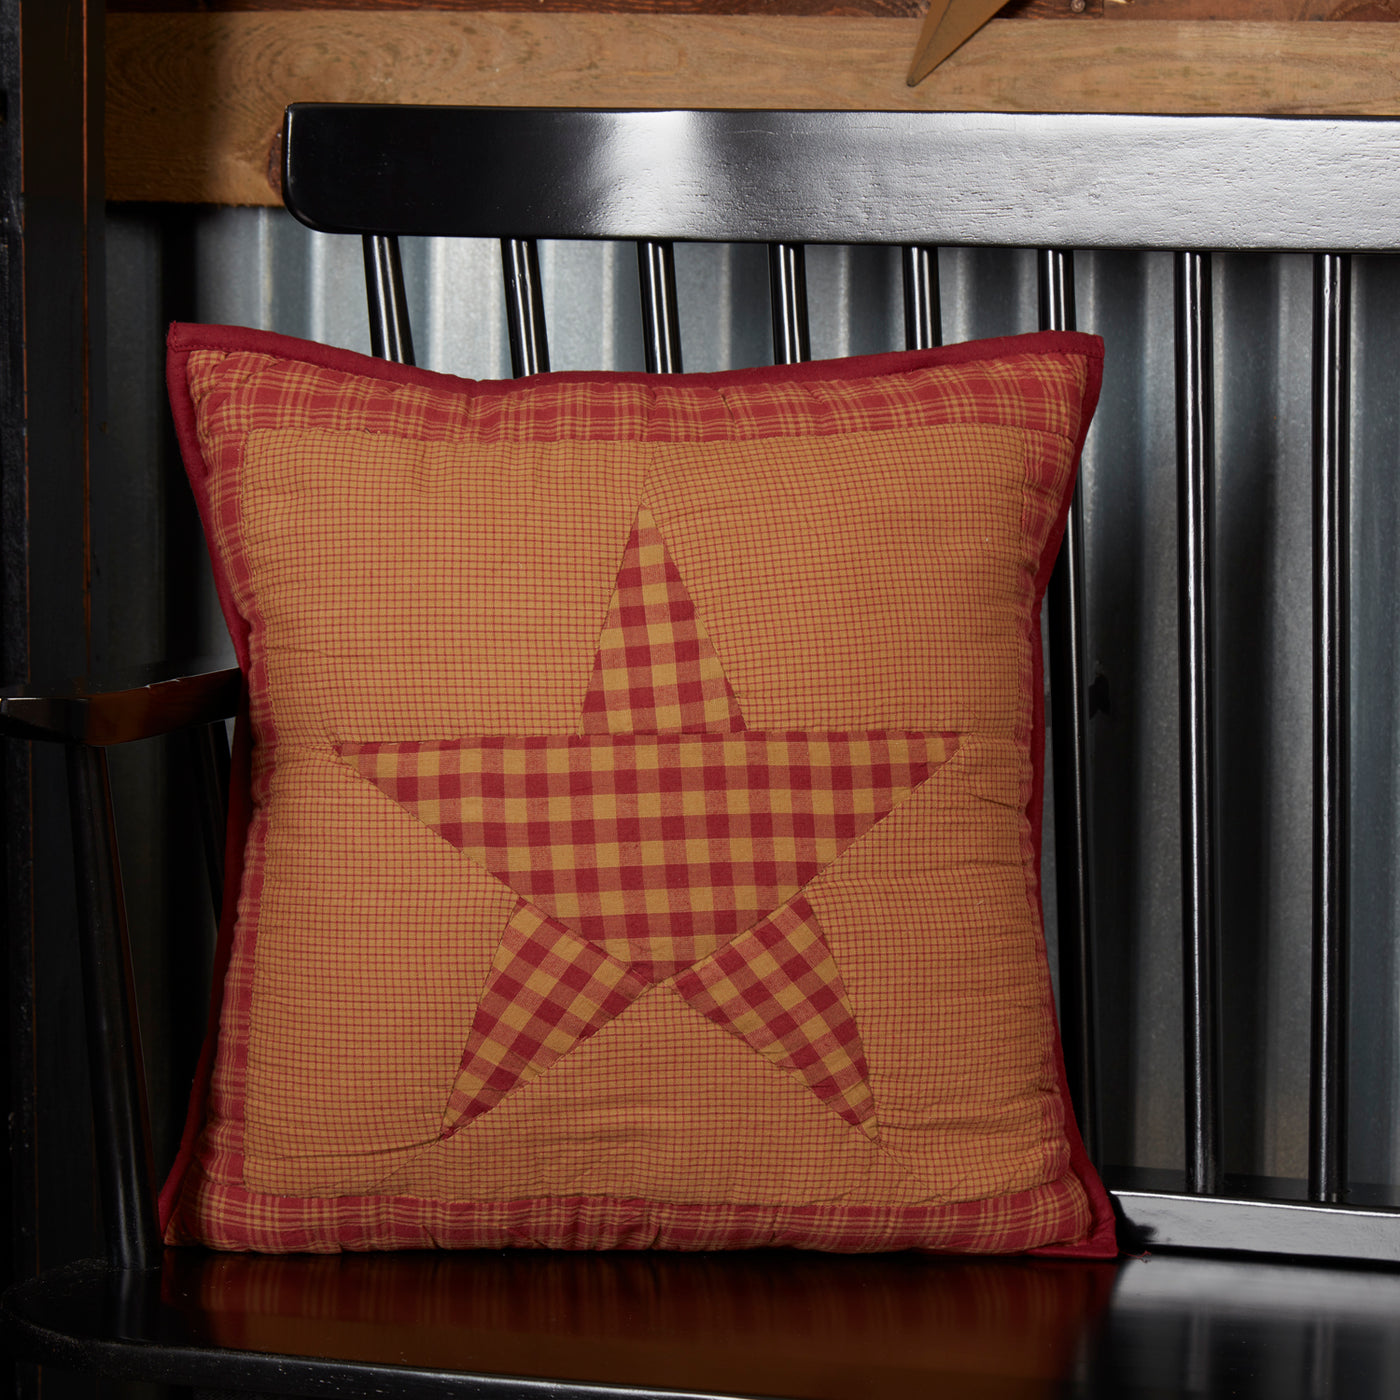 Ninepatch Star Quilted 16" Throw Pillow